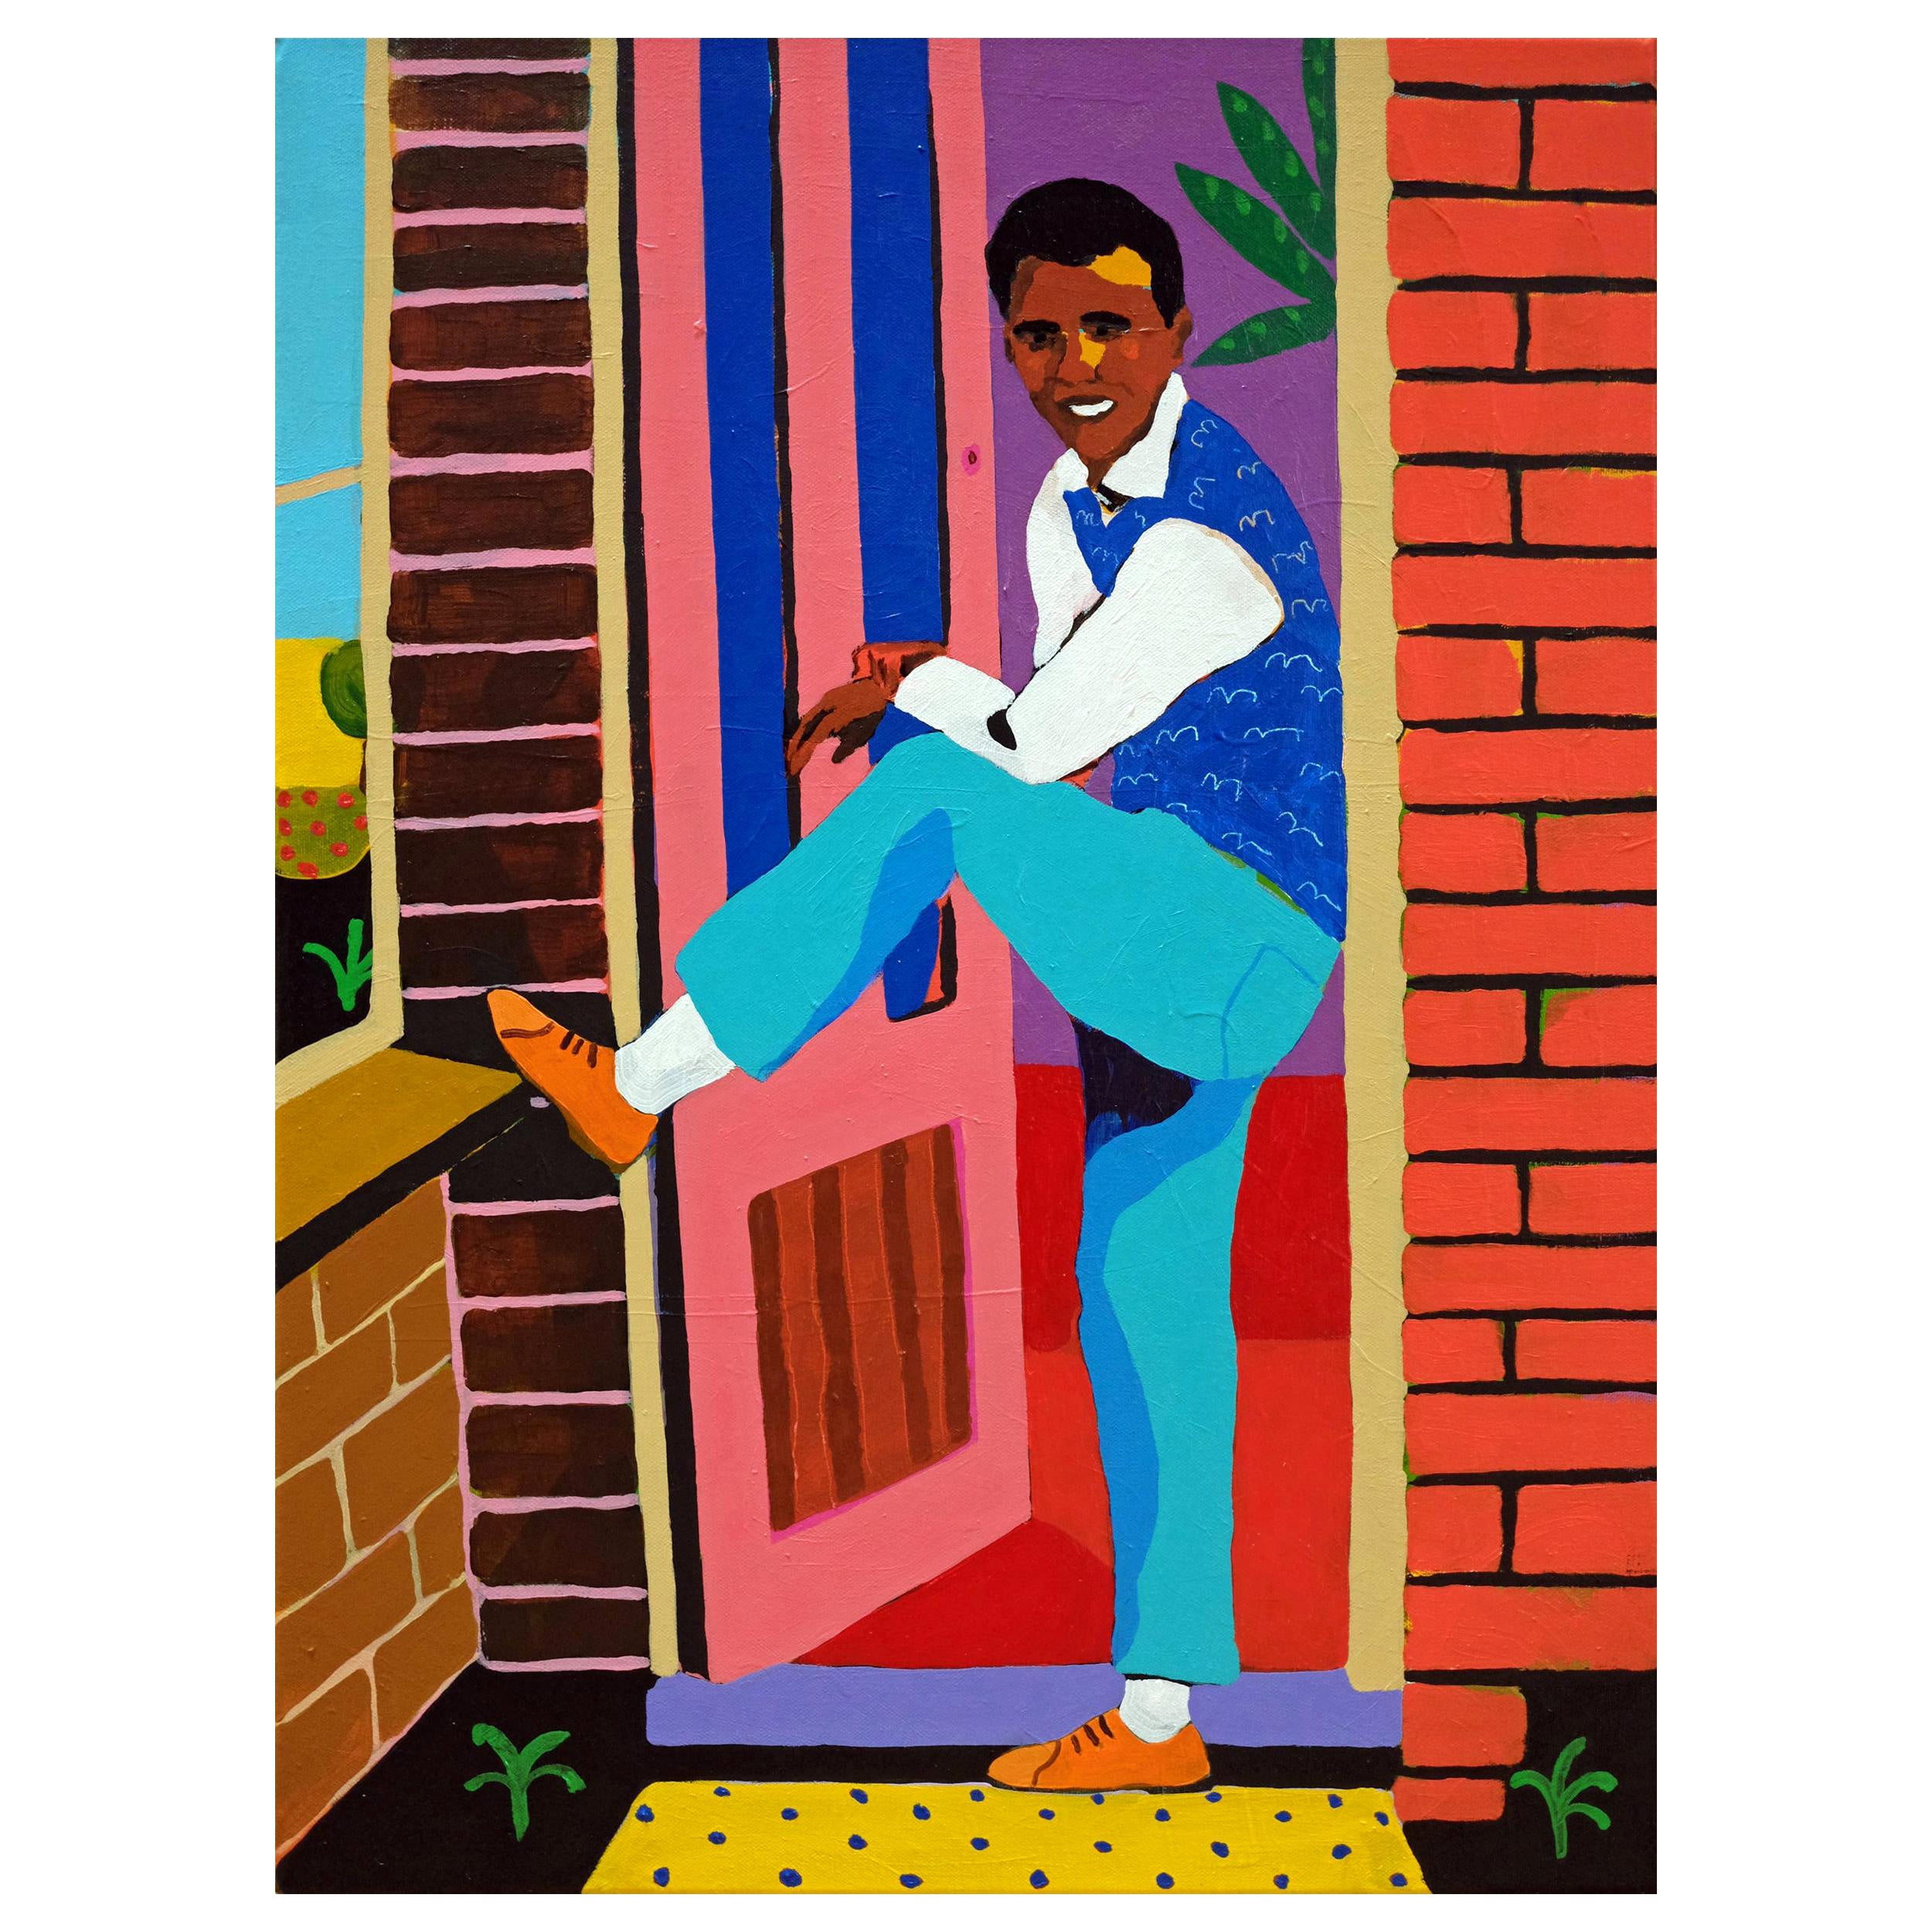 'He Had His Father's Jeans' Portrait Painting by Alan Fears Pop Art For Sale